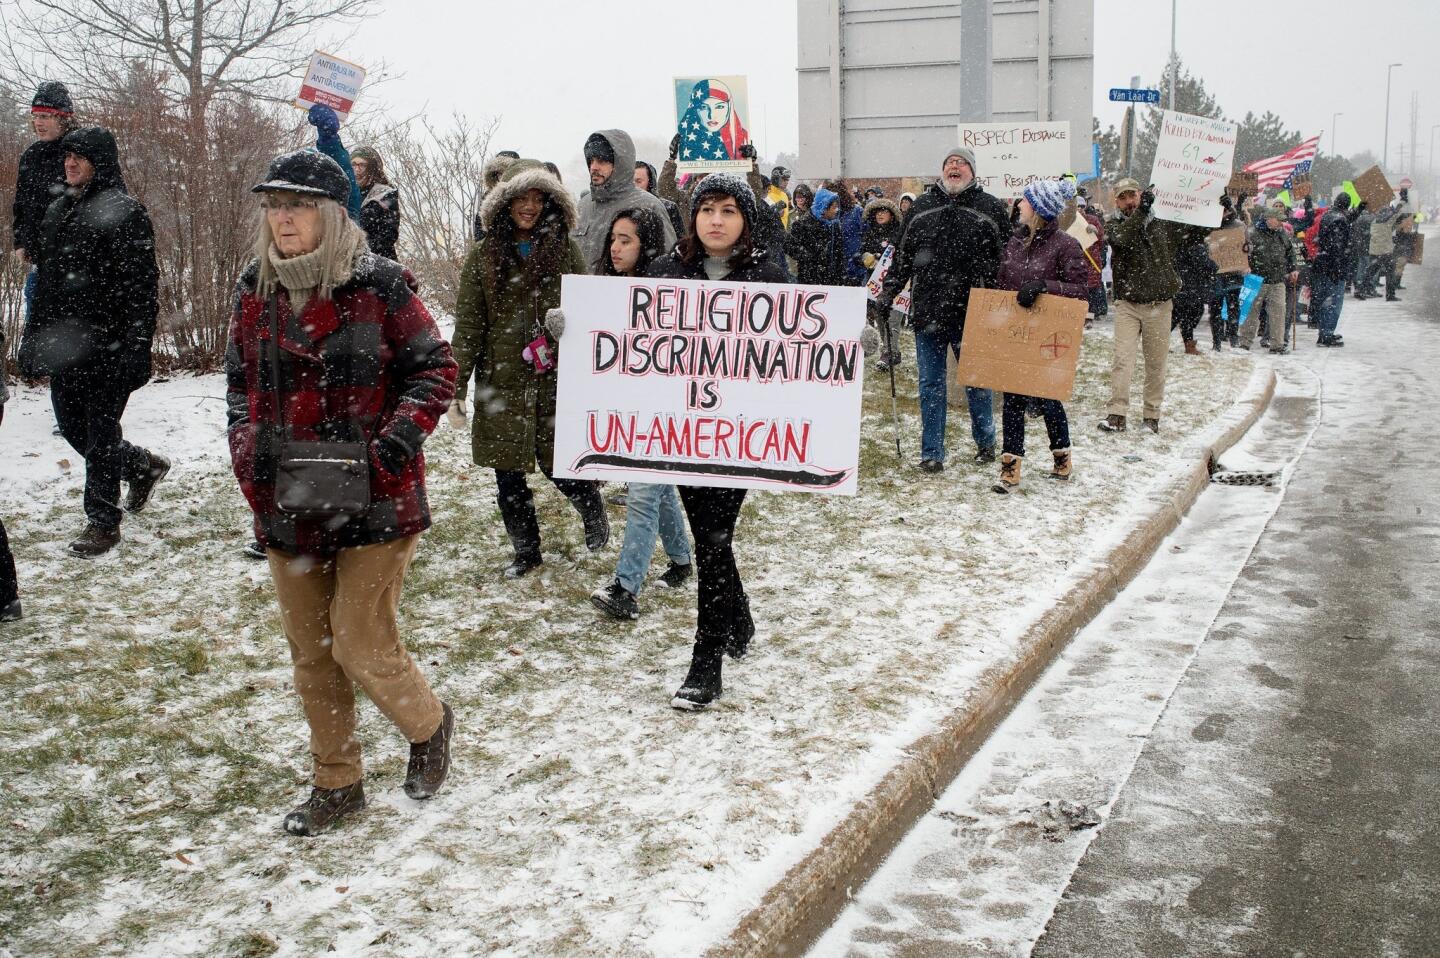 People march during a protest against an executive order on immigration from President Trump at Gerald R. Ford International Airport in Grand Rapids on Sunday, Jan. 29, 2017.